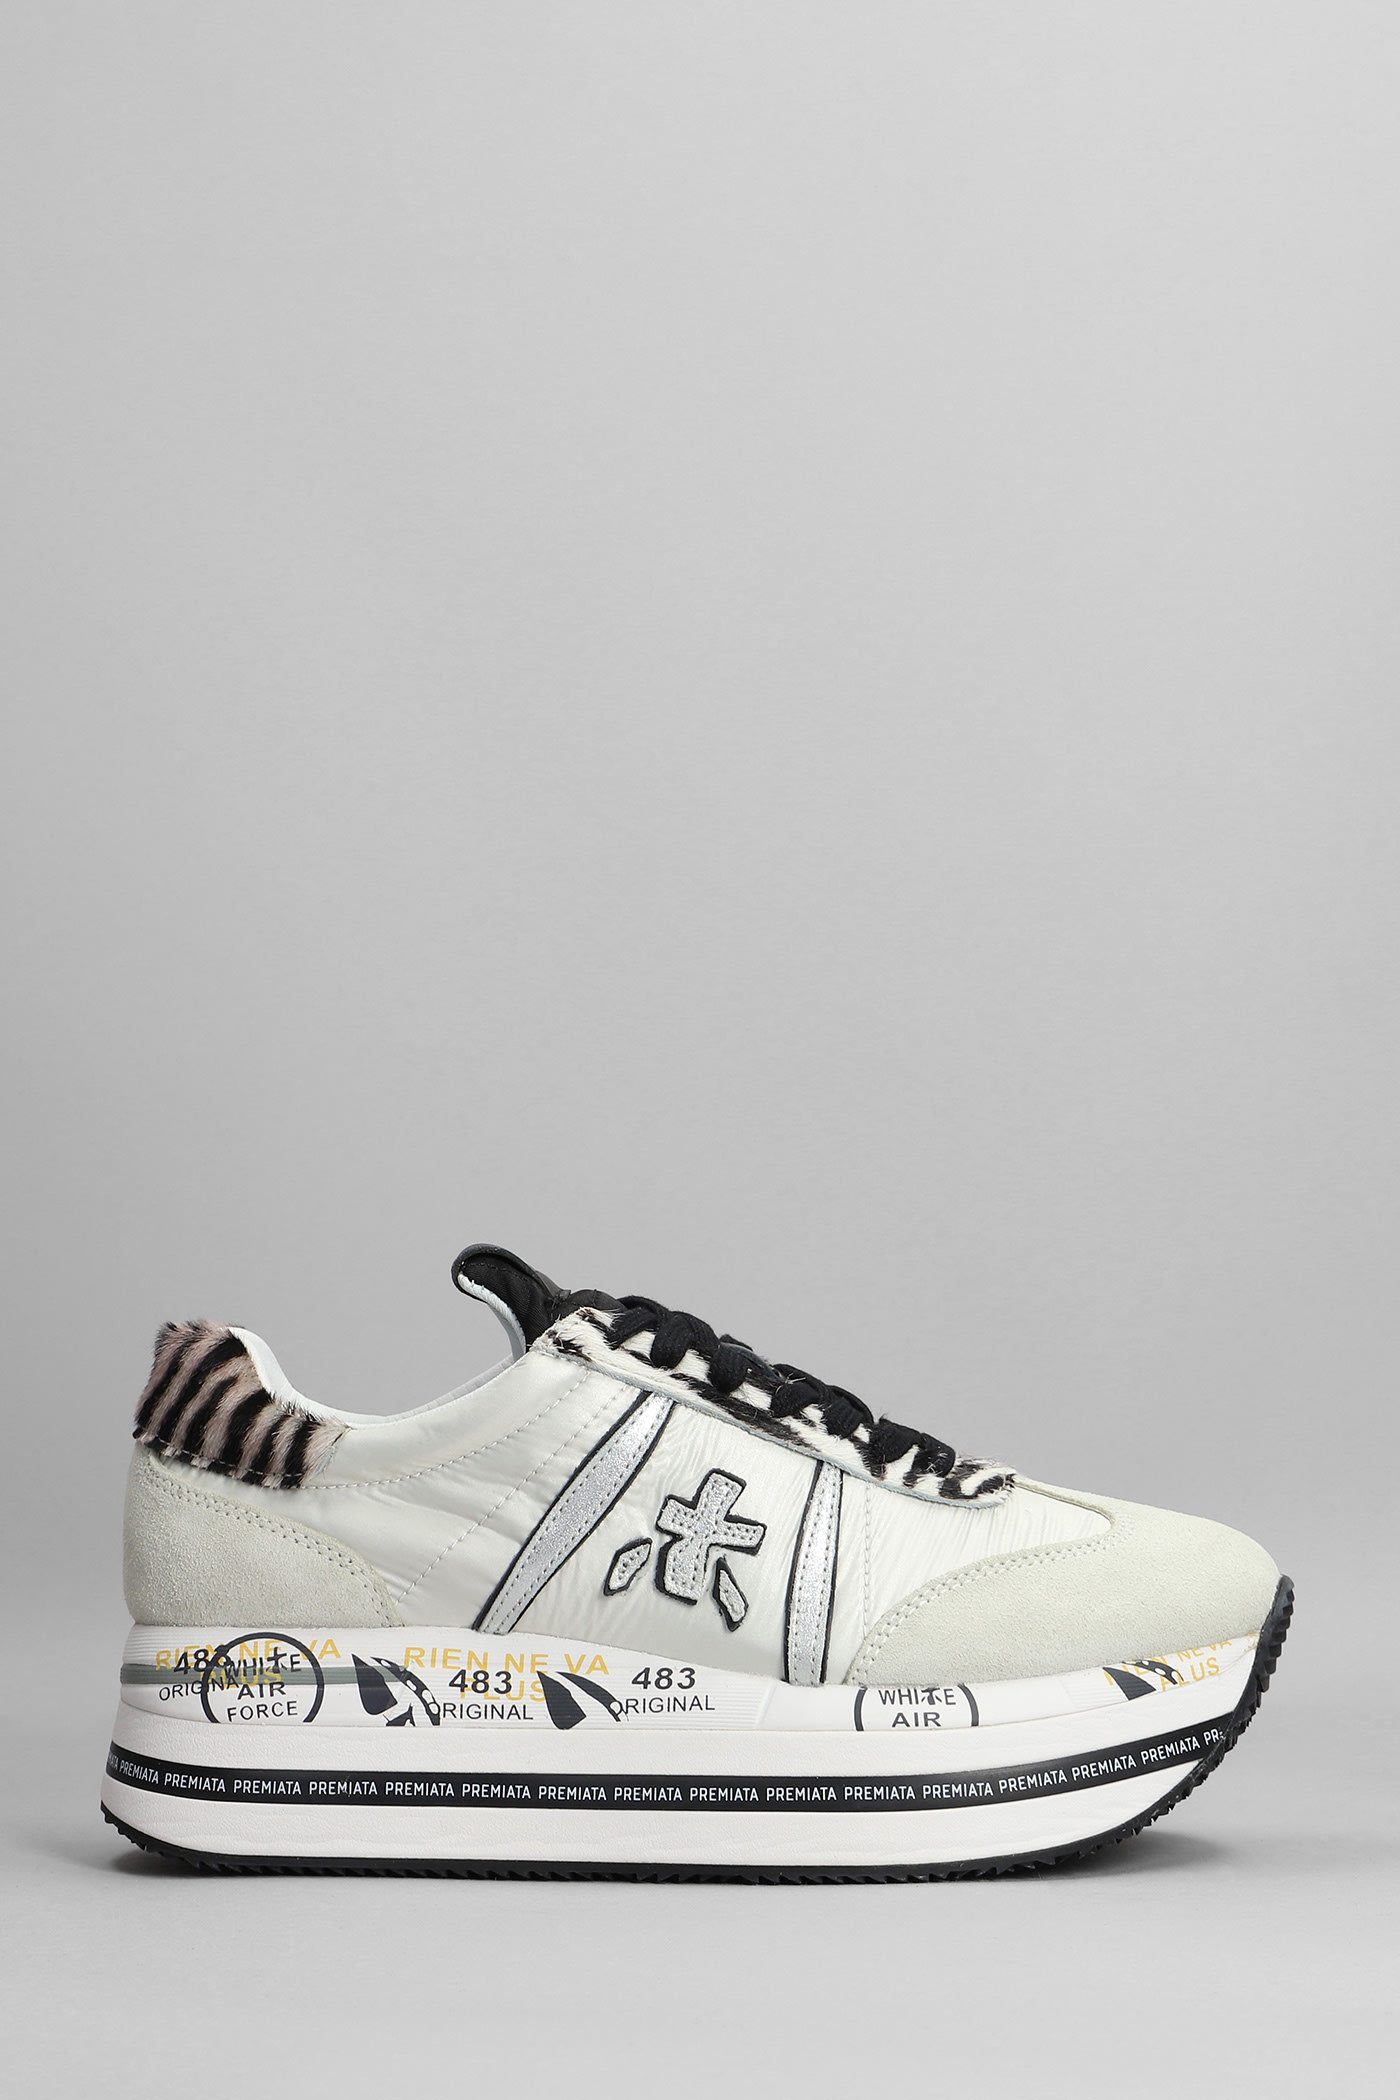 Premiata Beth Sneakers In Grey Suede And Fabric